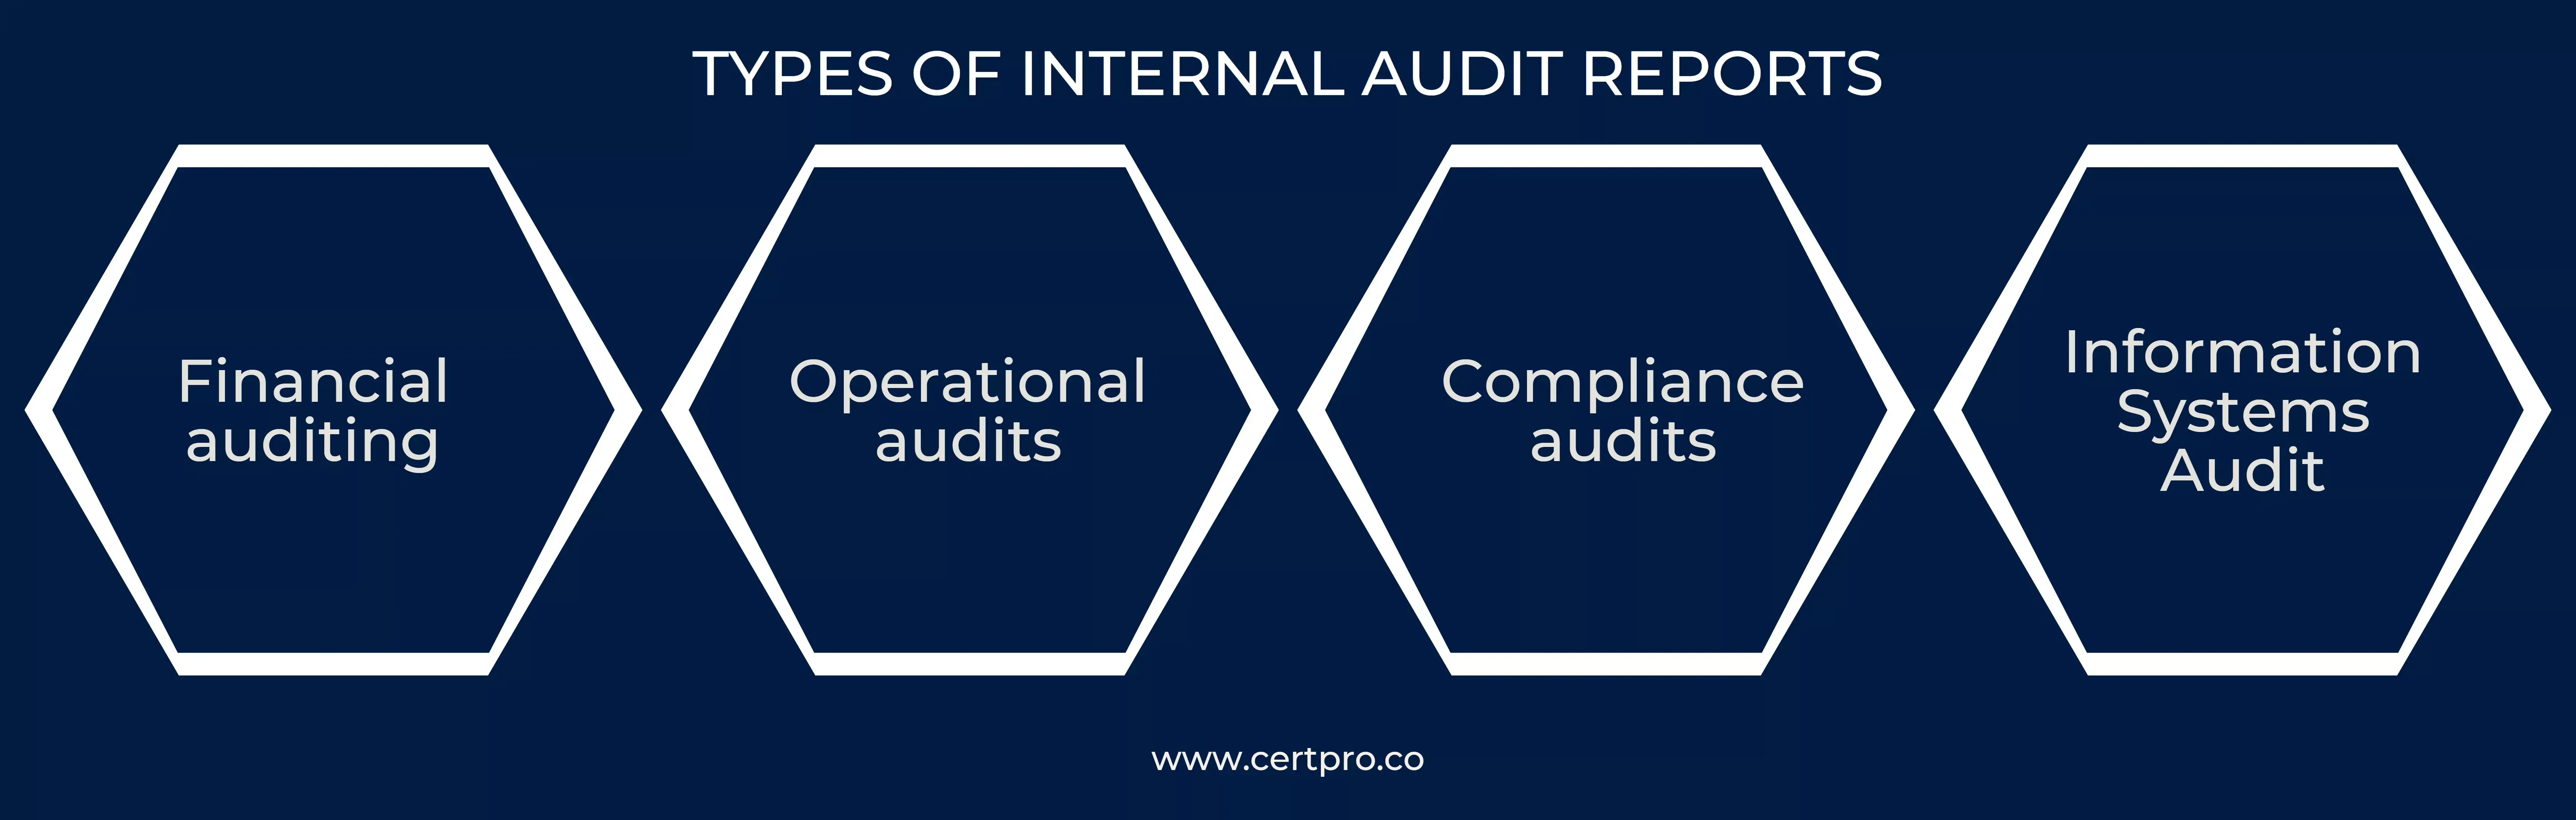 TYPES OF INTERNAL AUDIT REPORTS